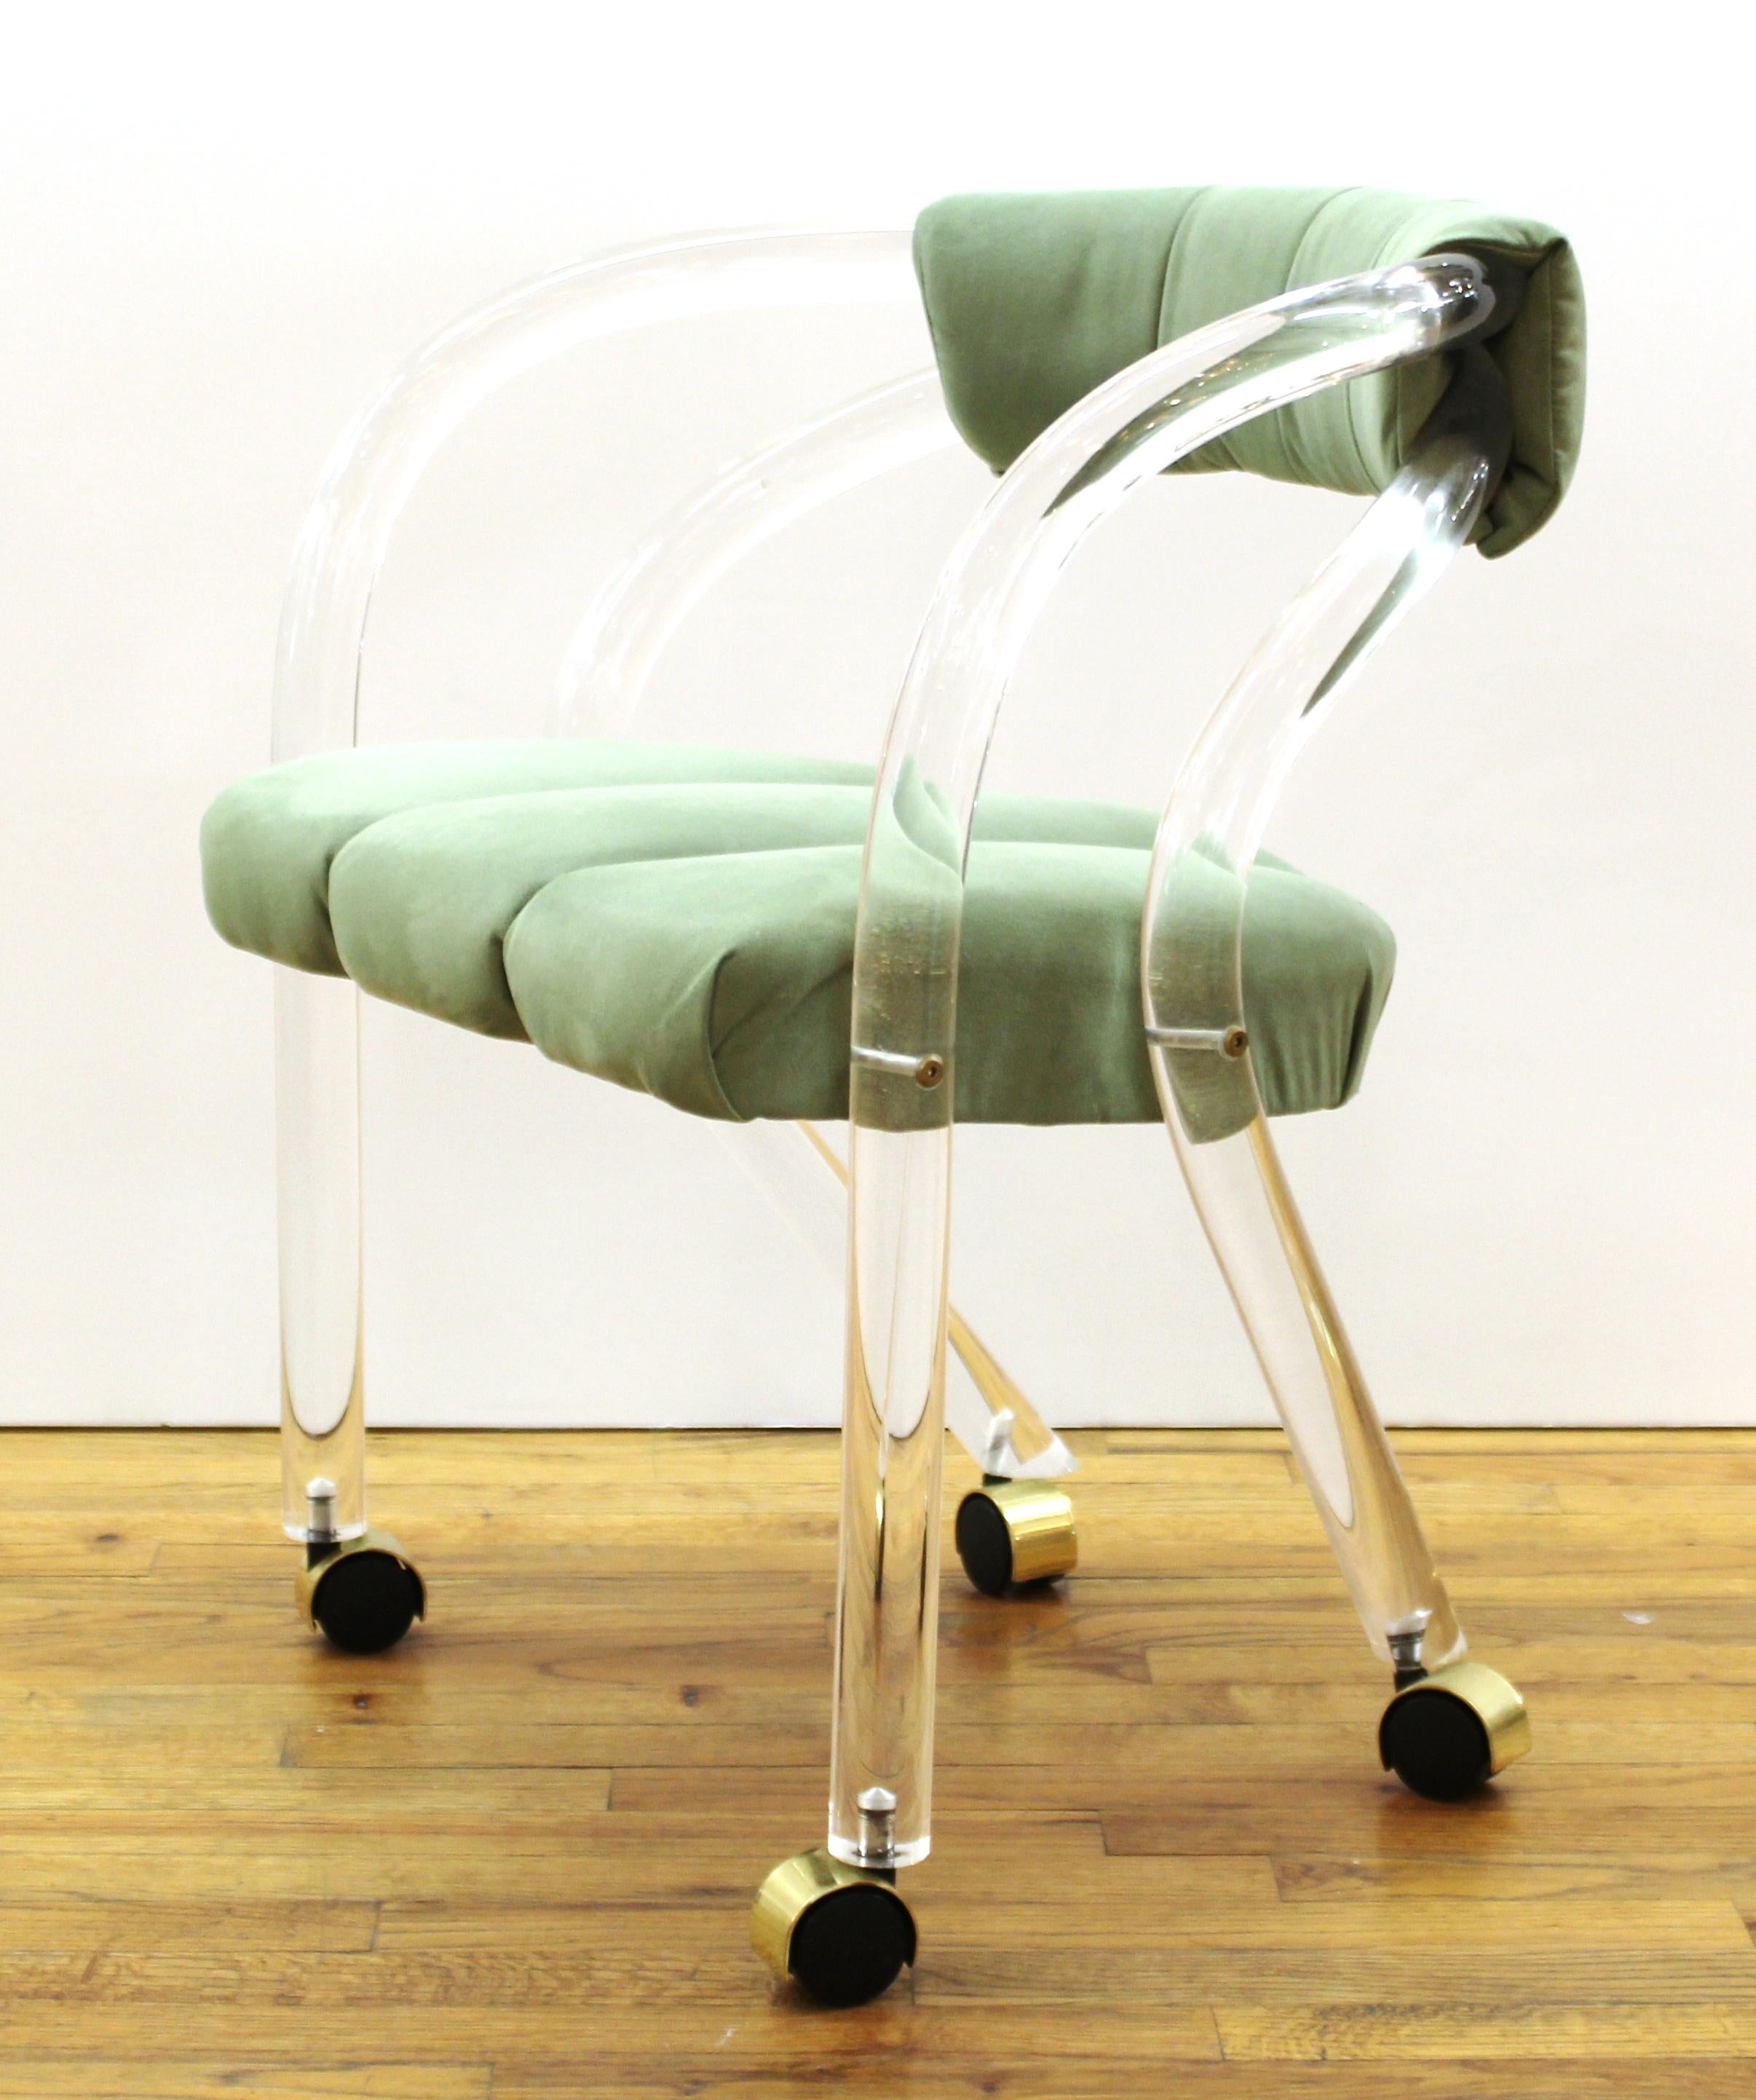 Set of four Modern double-band Lucite armchairs on casters with green upholstery by Charles Hollis Jones. In great vintage condition with age-appropriate wear and use.